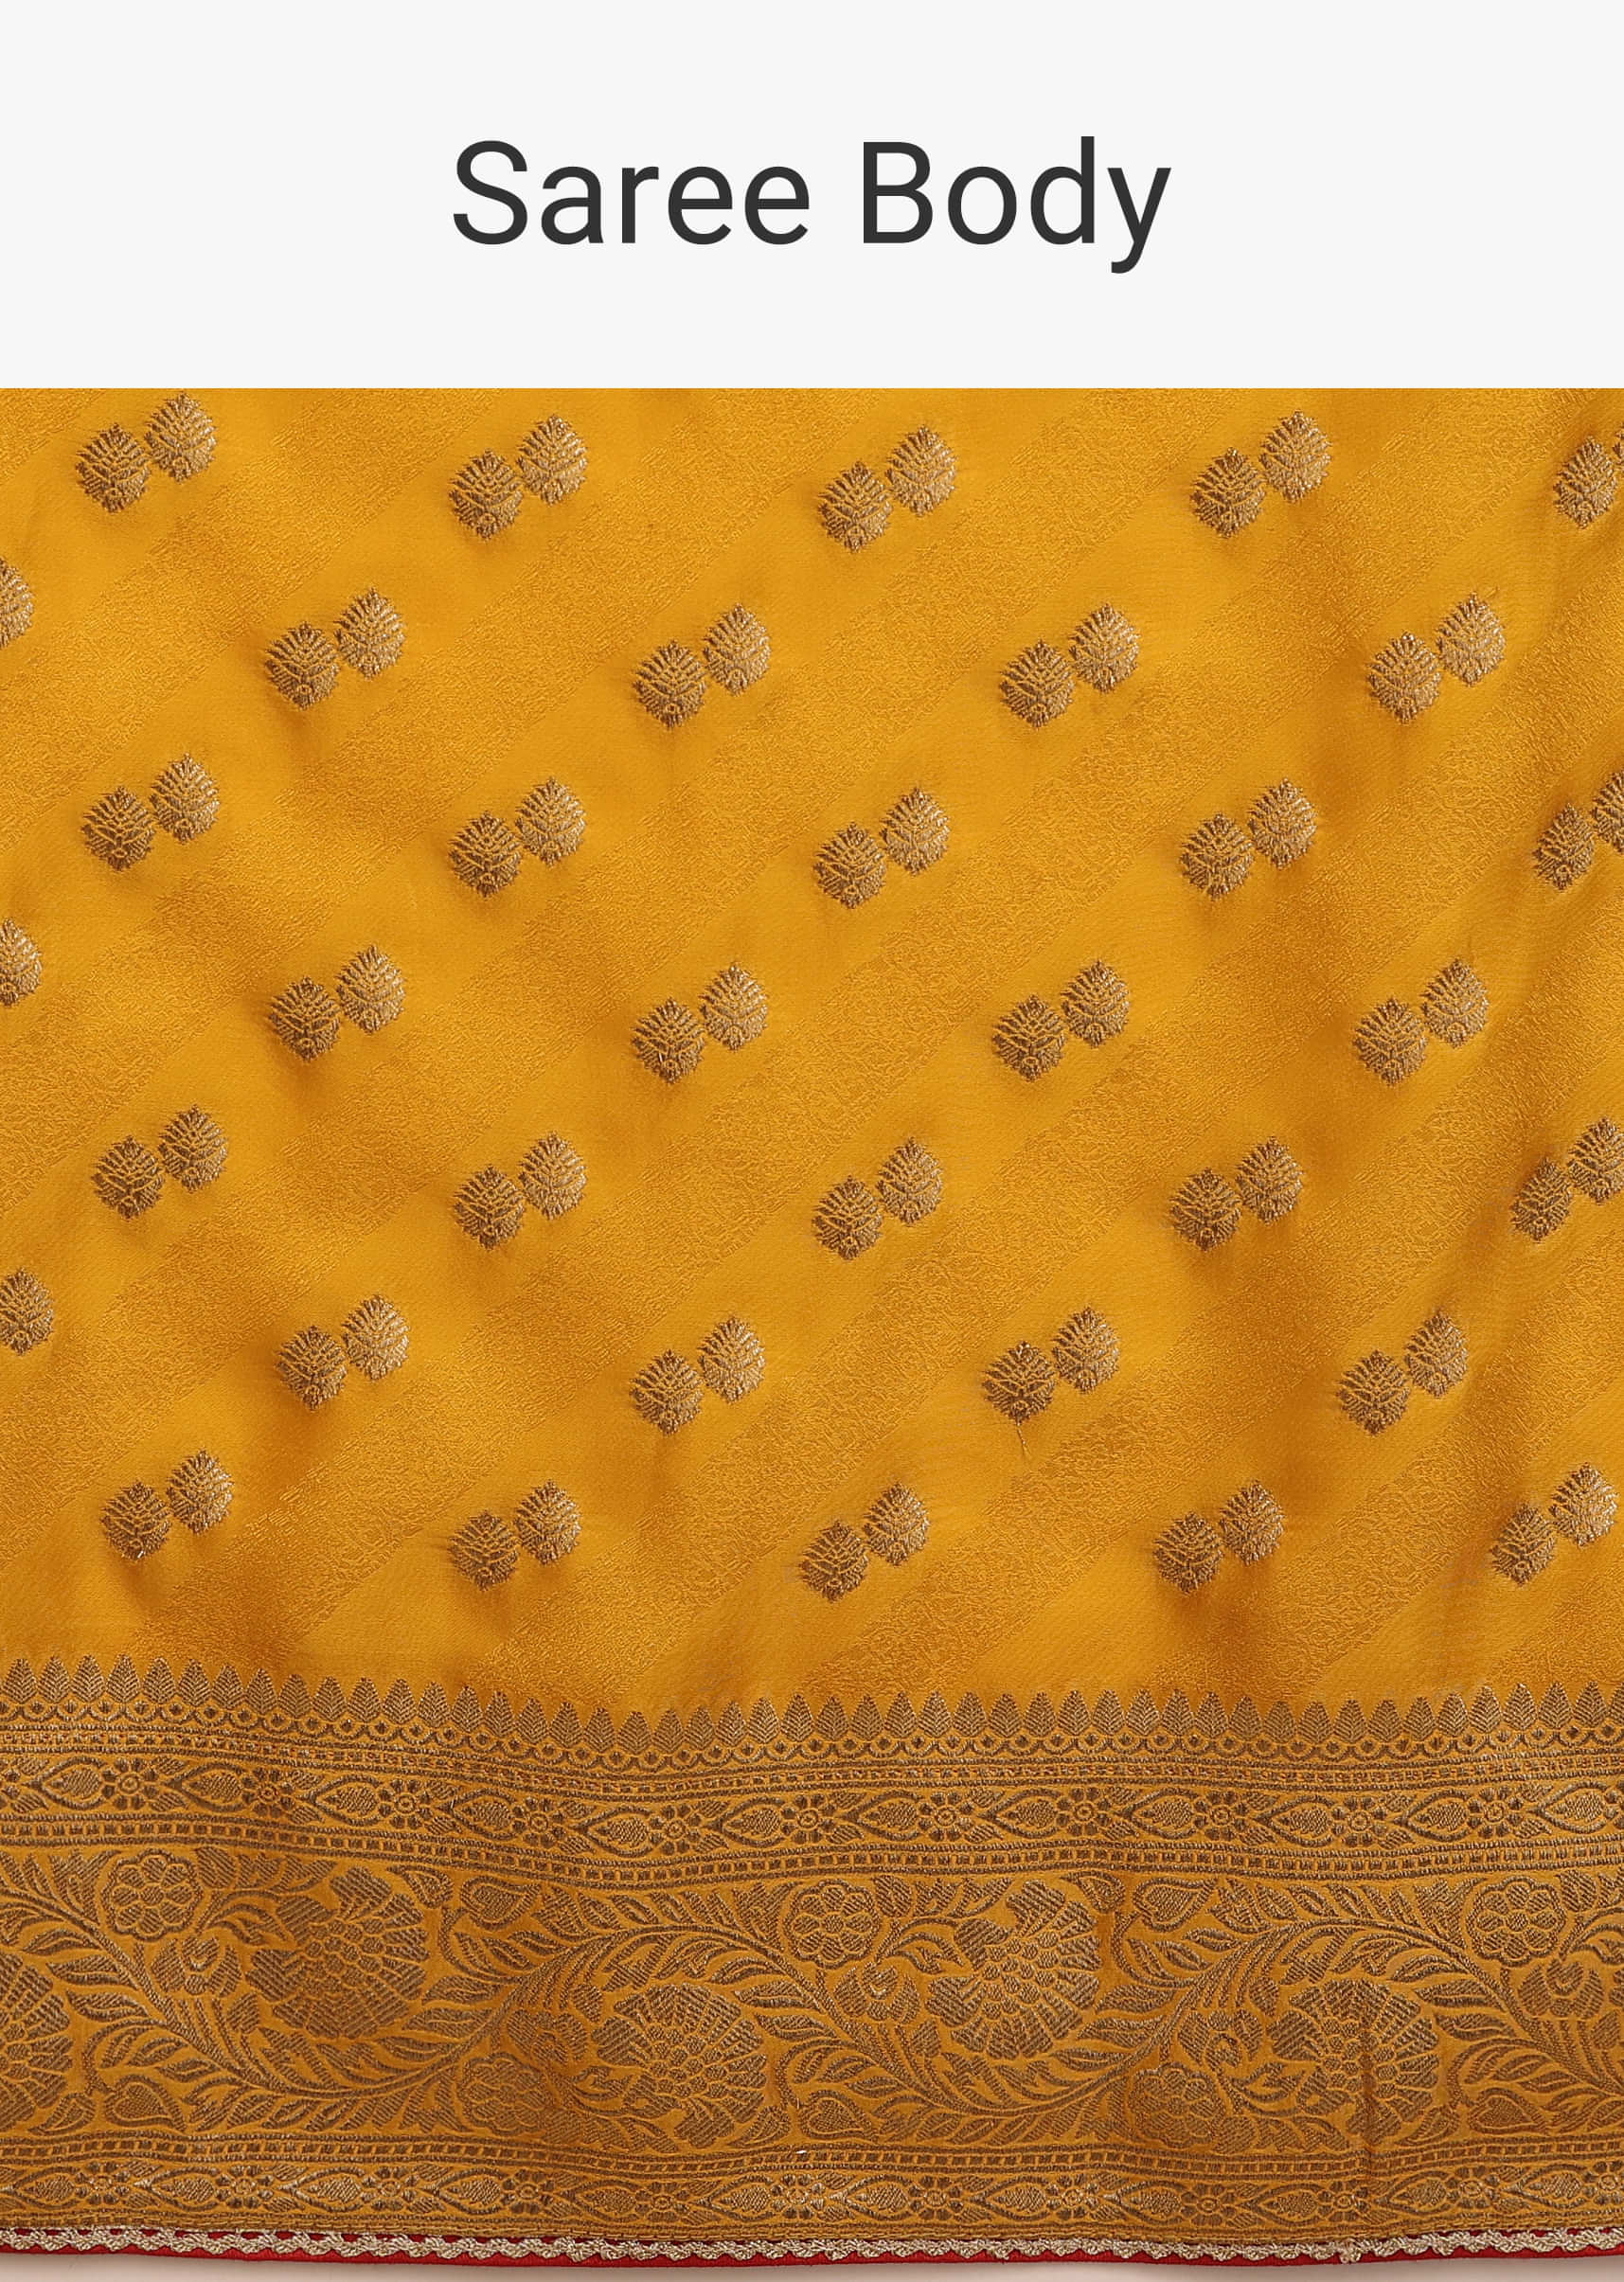 Amber Yellow Saree In Satin With Woven Golden Buttis And Floral Pallu Design